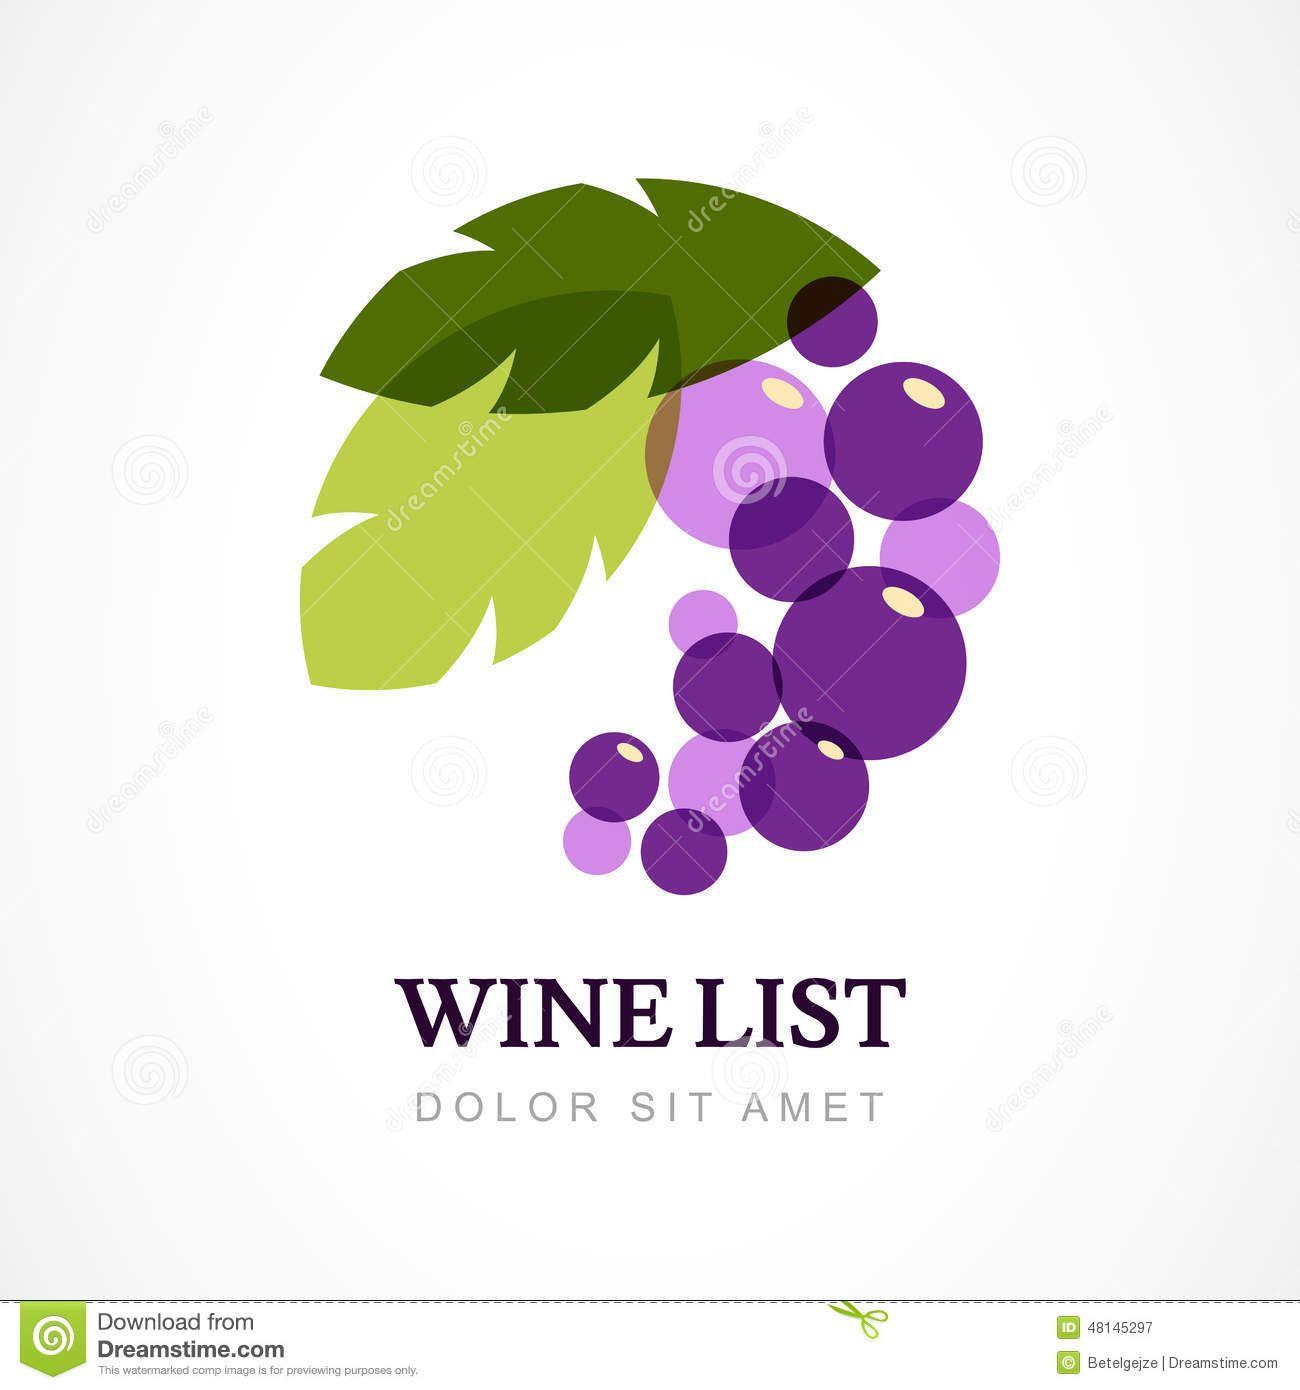 Grape Logo - Vector Logo Design Template. Branch Of Grape With Leaves Stock ...